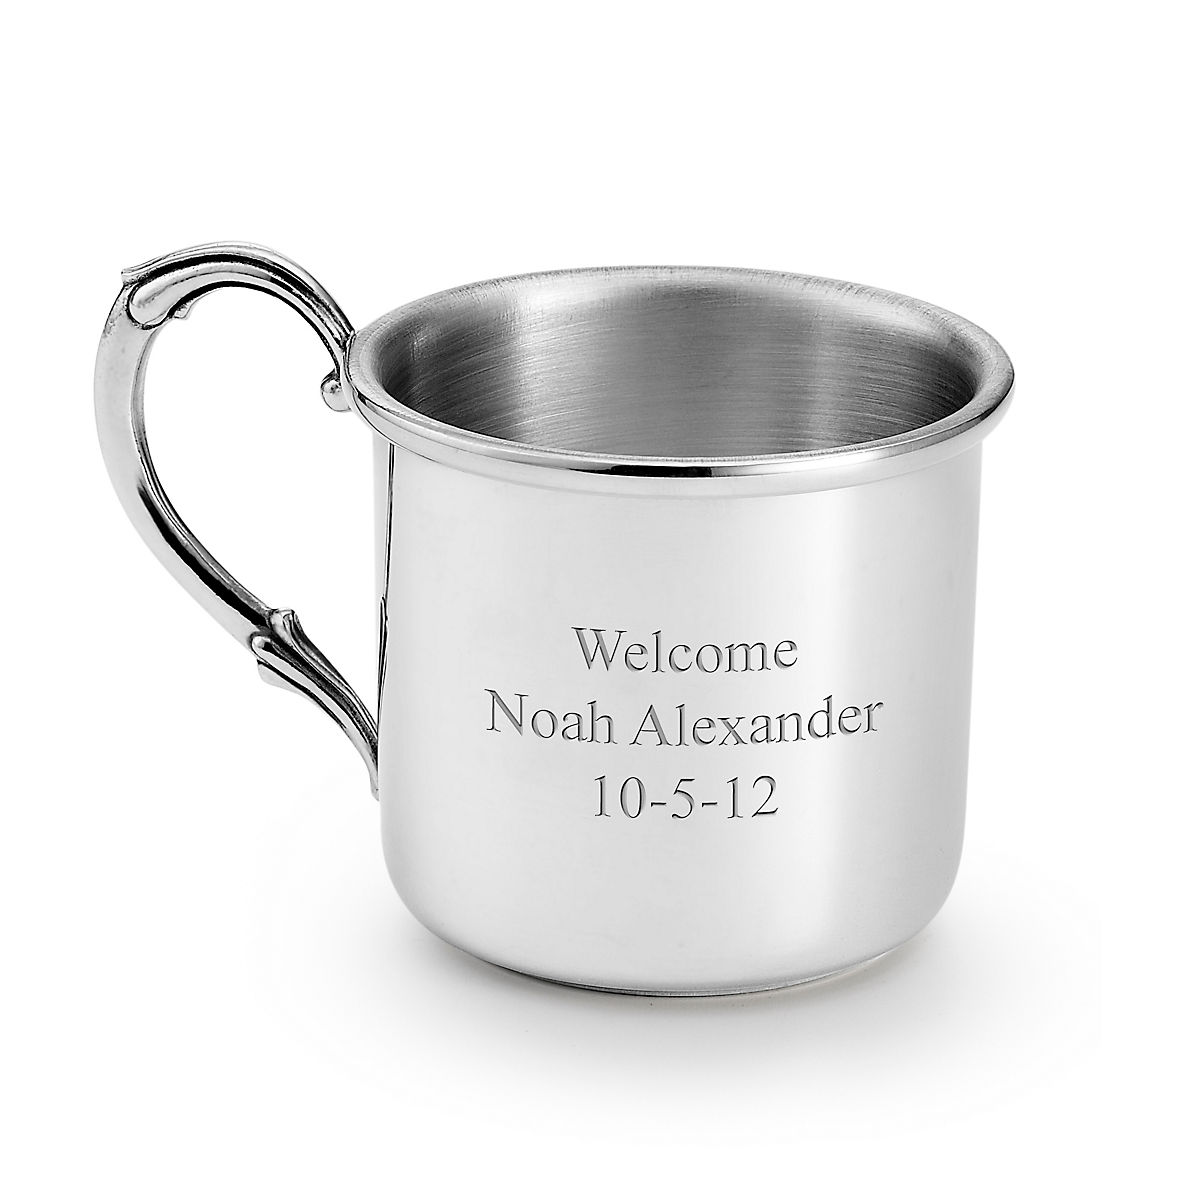 Pewter Baby or Child Cup Heirloom Gift Custom Engraved Personalized Engraving Monogram